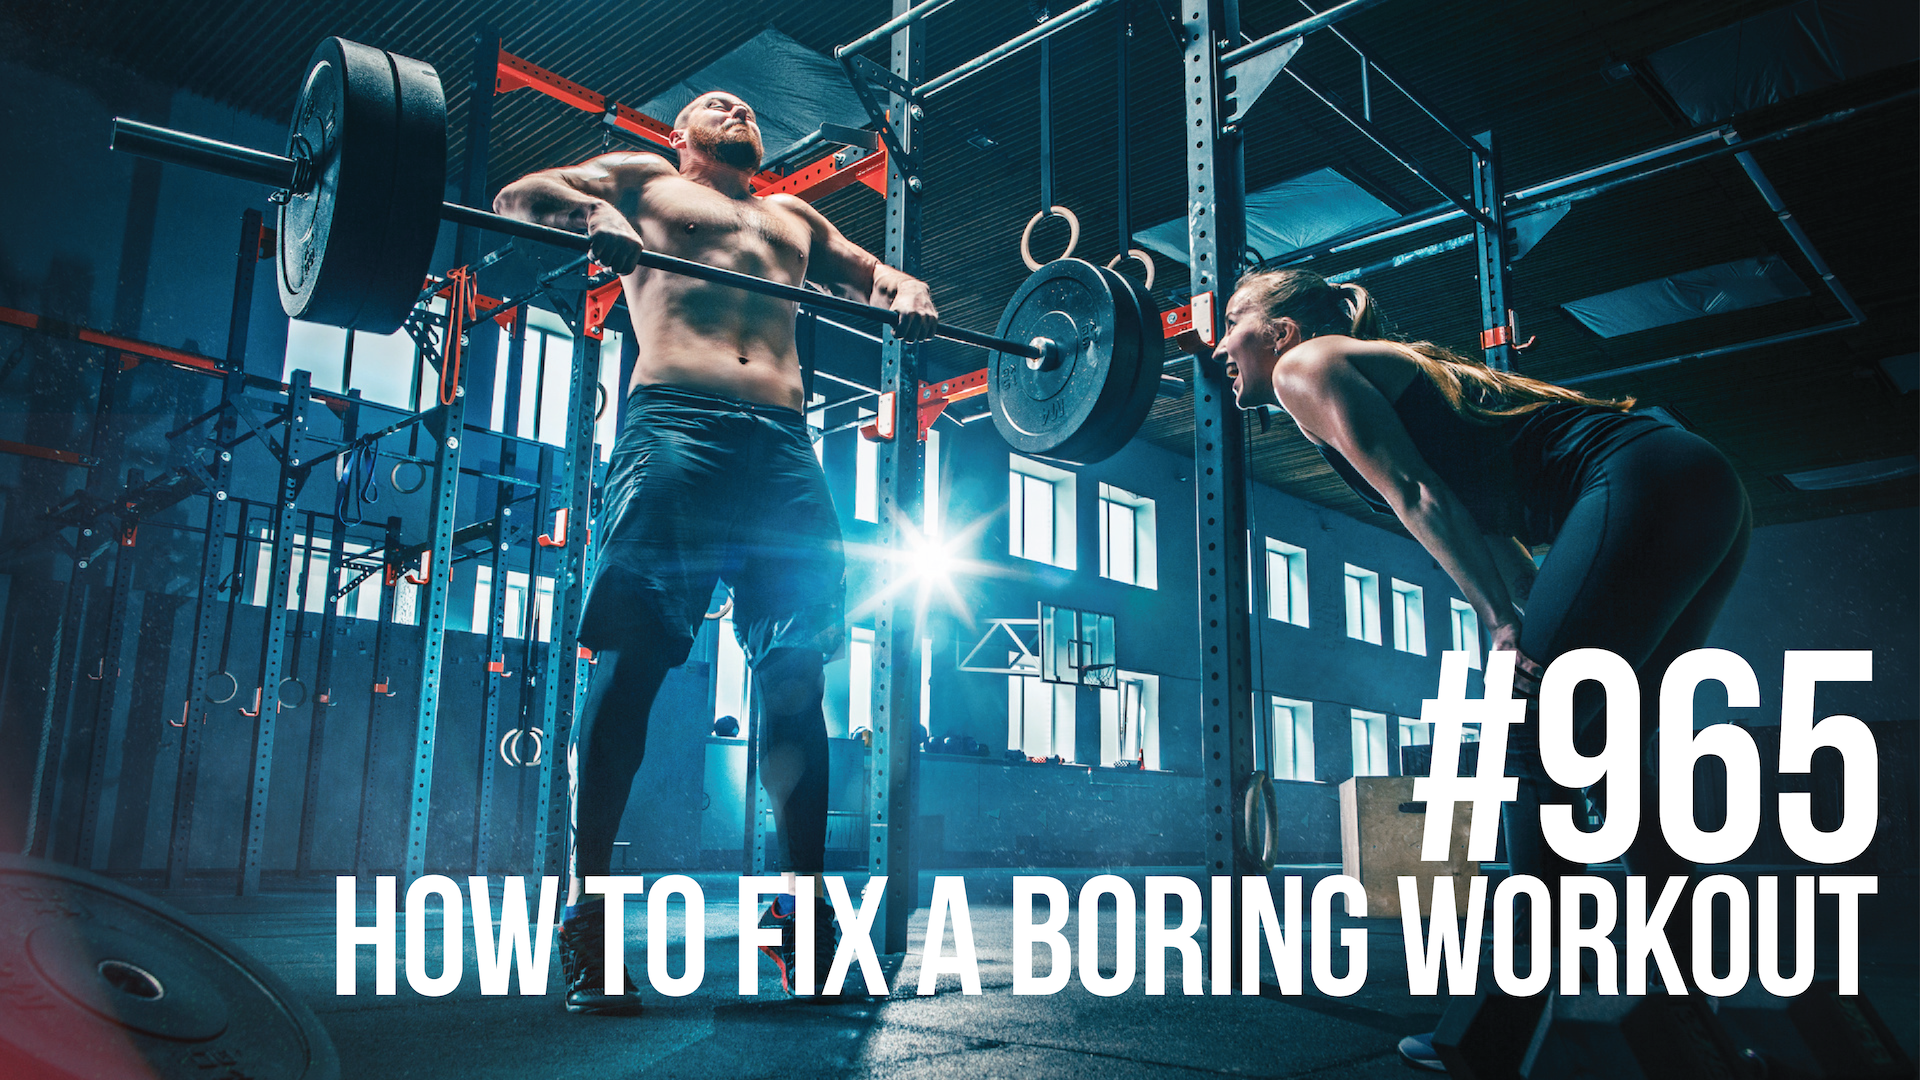 965: How to Fix a Boring Workout